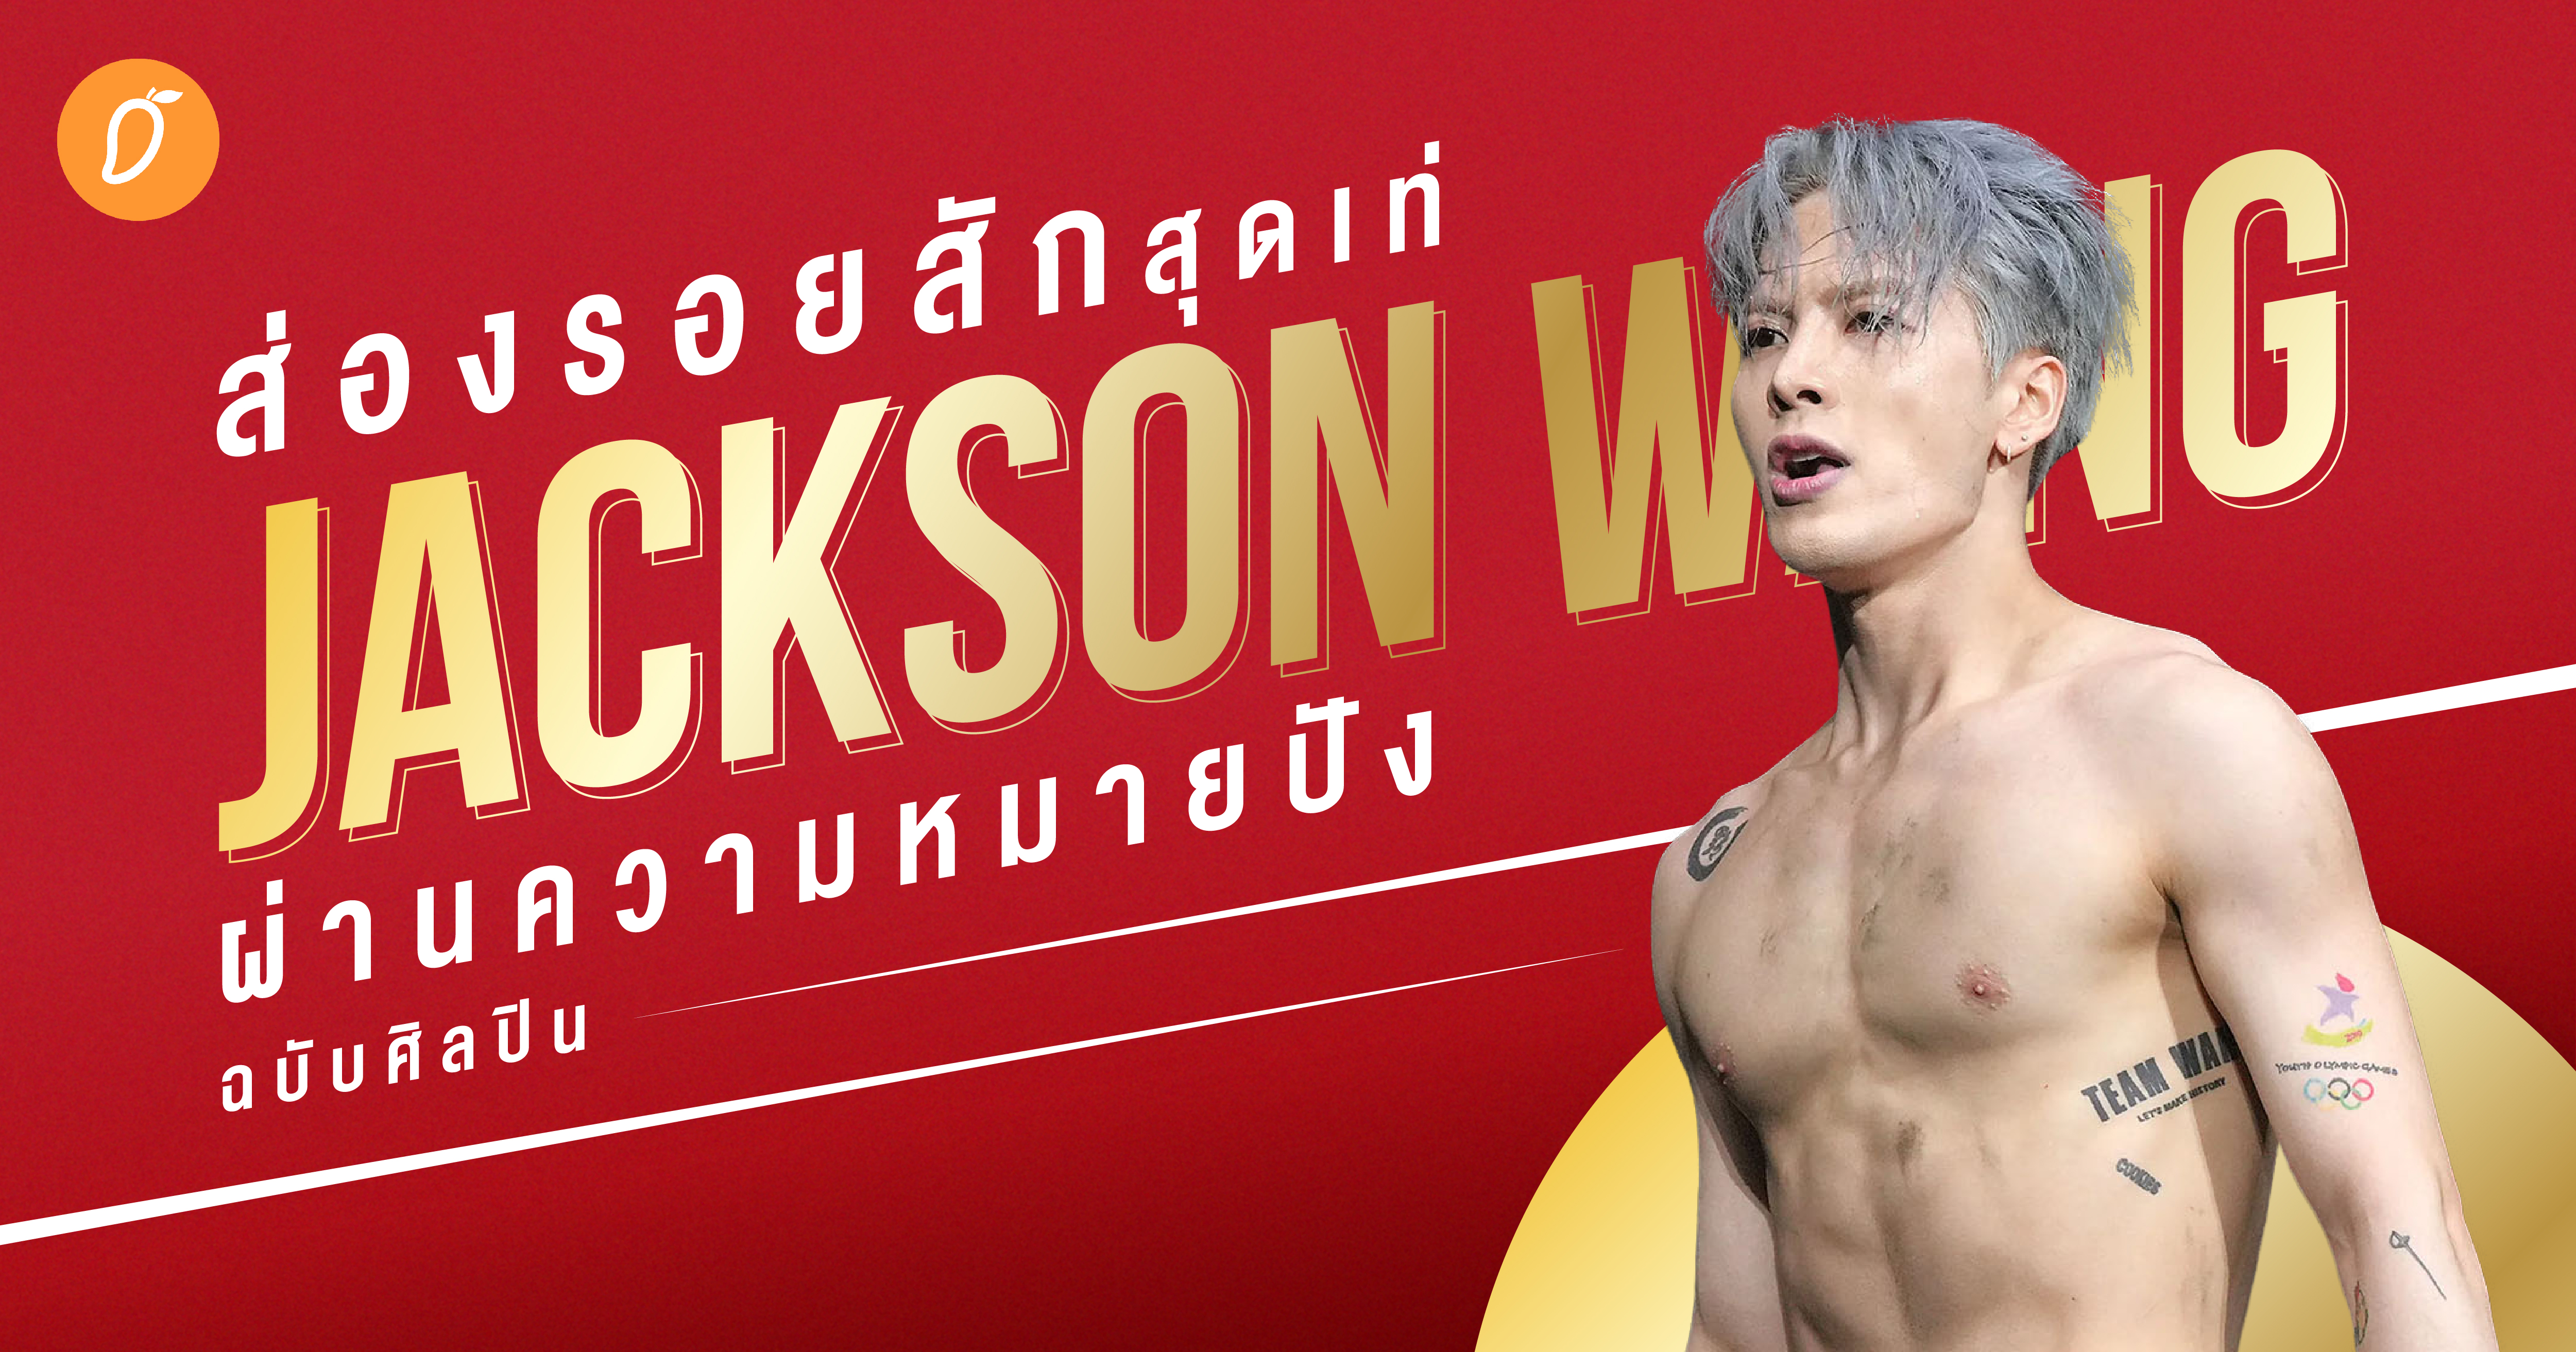 JACKSON WANG GALLERY  Jackson Wangs tattoos and its meanings